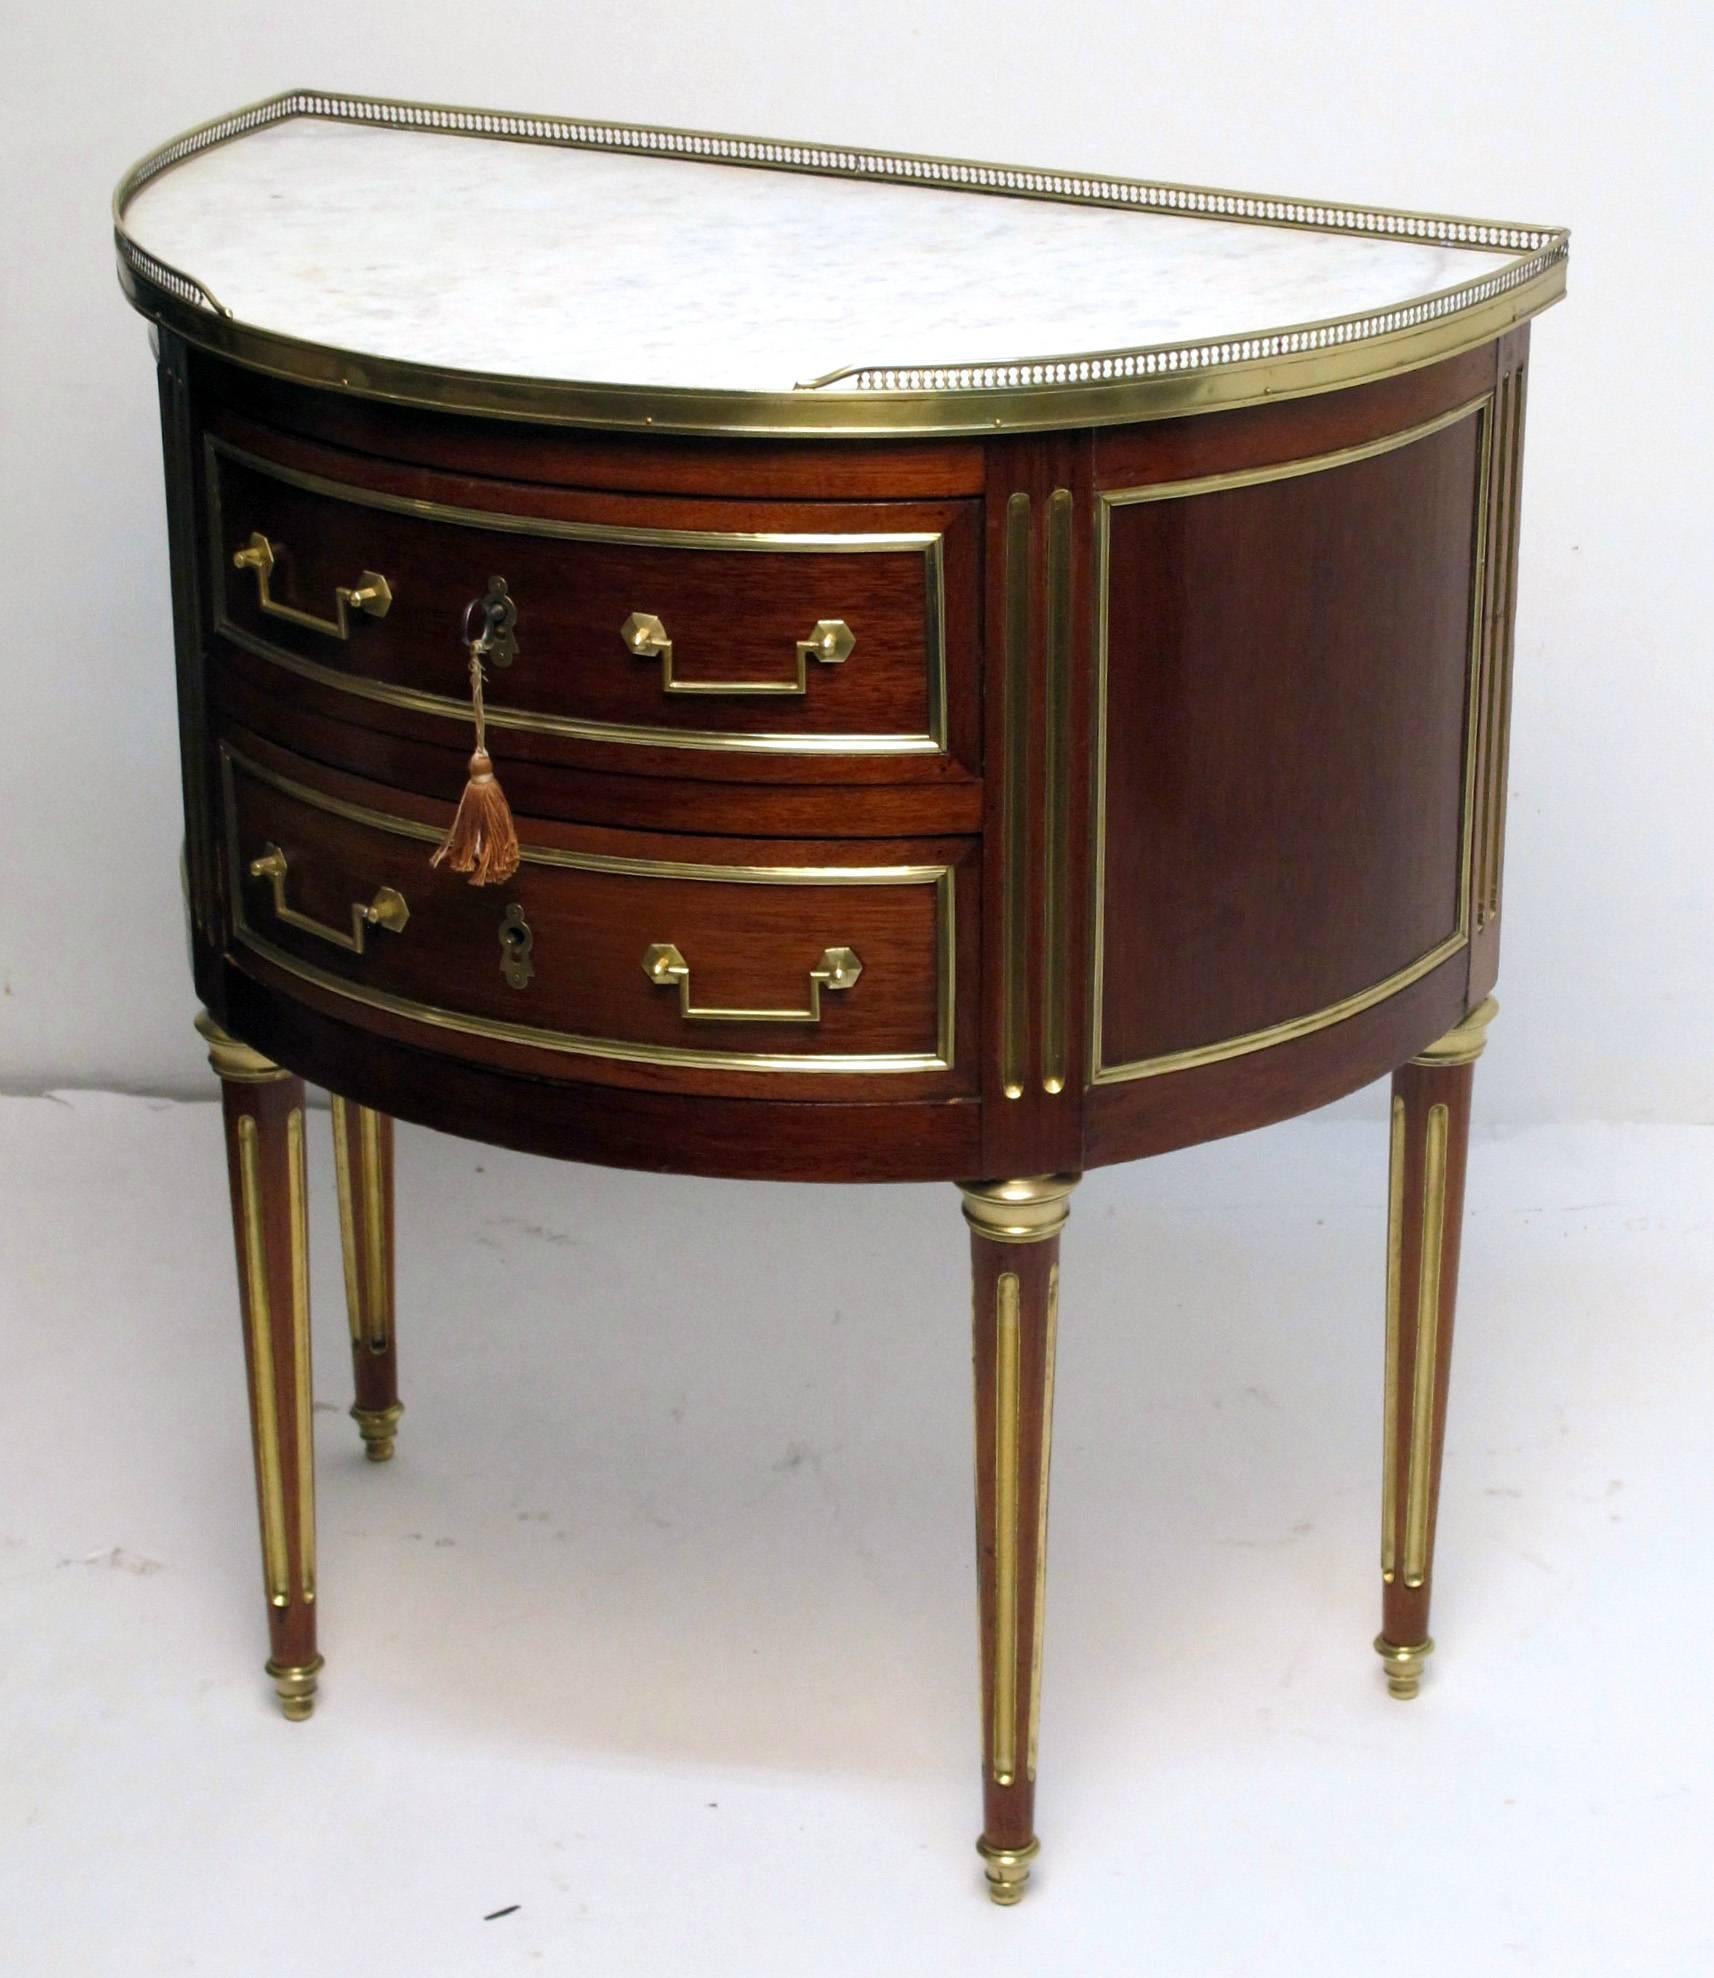 A Directoire period (1789-1804) mahogany demilune side table with a marble top and two drawers. Having brass trim, gallery, hardware and brass inlay on the fluted legs, France, late 18th-early 19th century. Original marble top has a small older